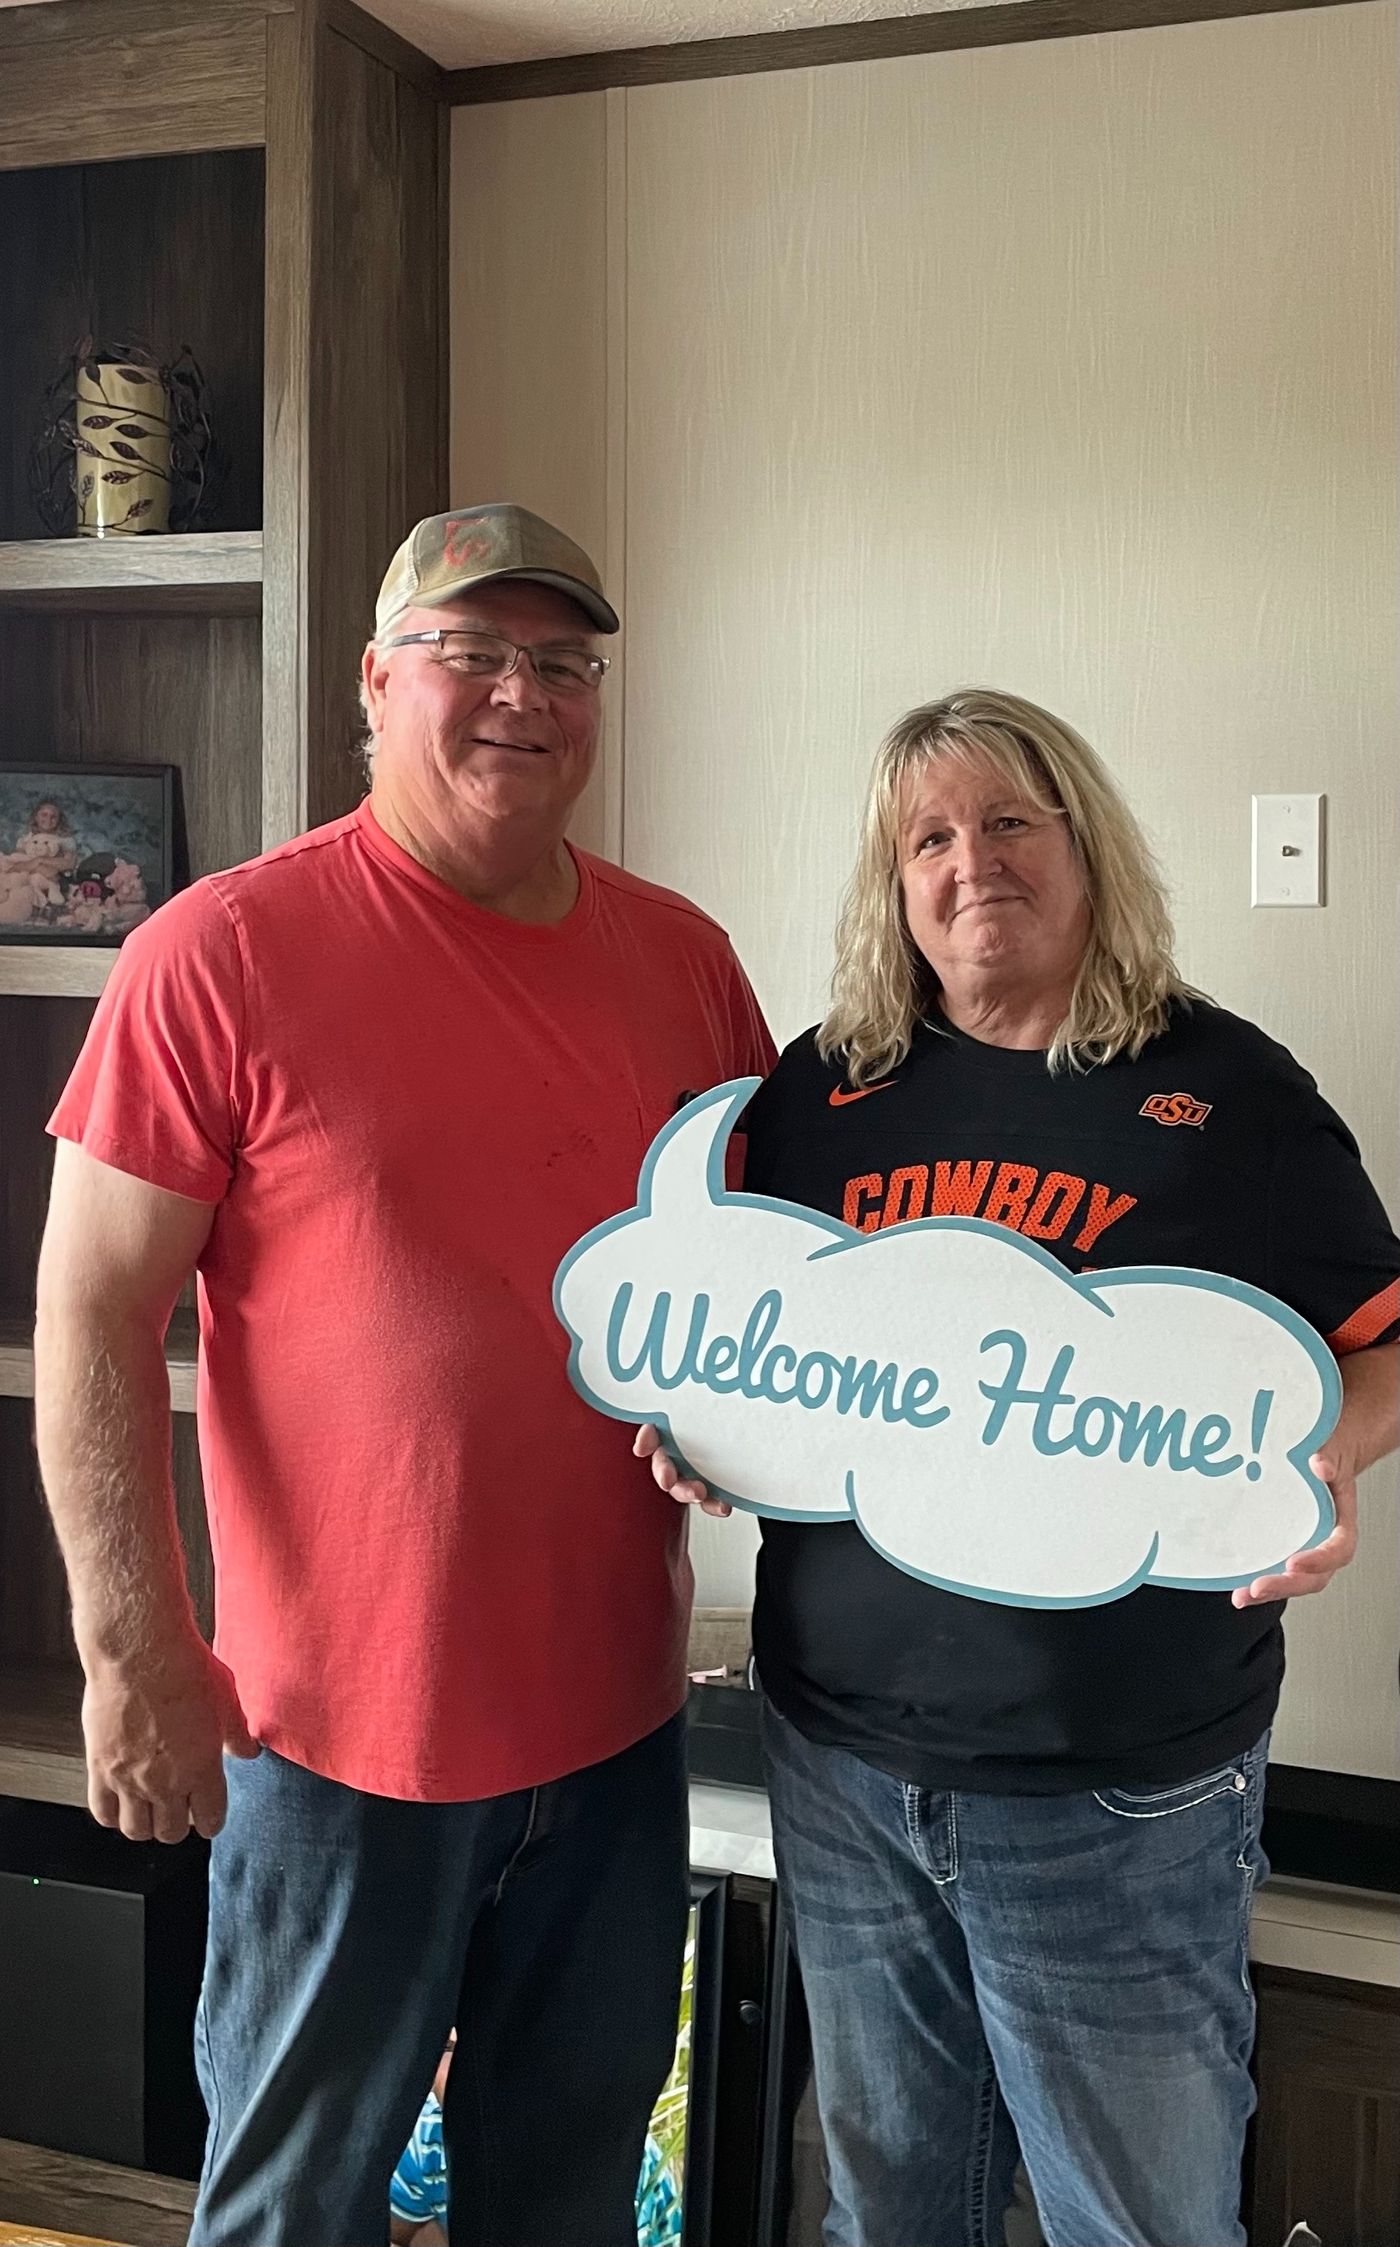 RODNEY DALE W. welcome home image